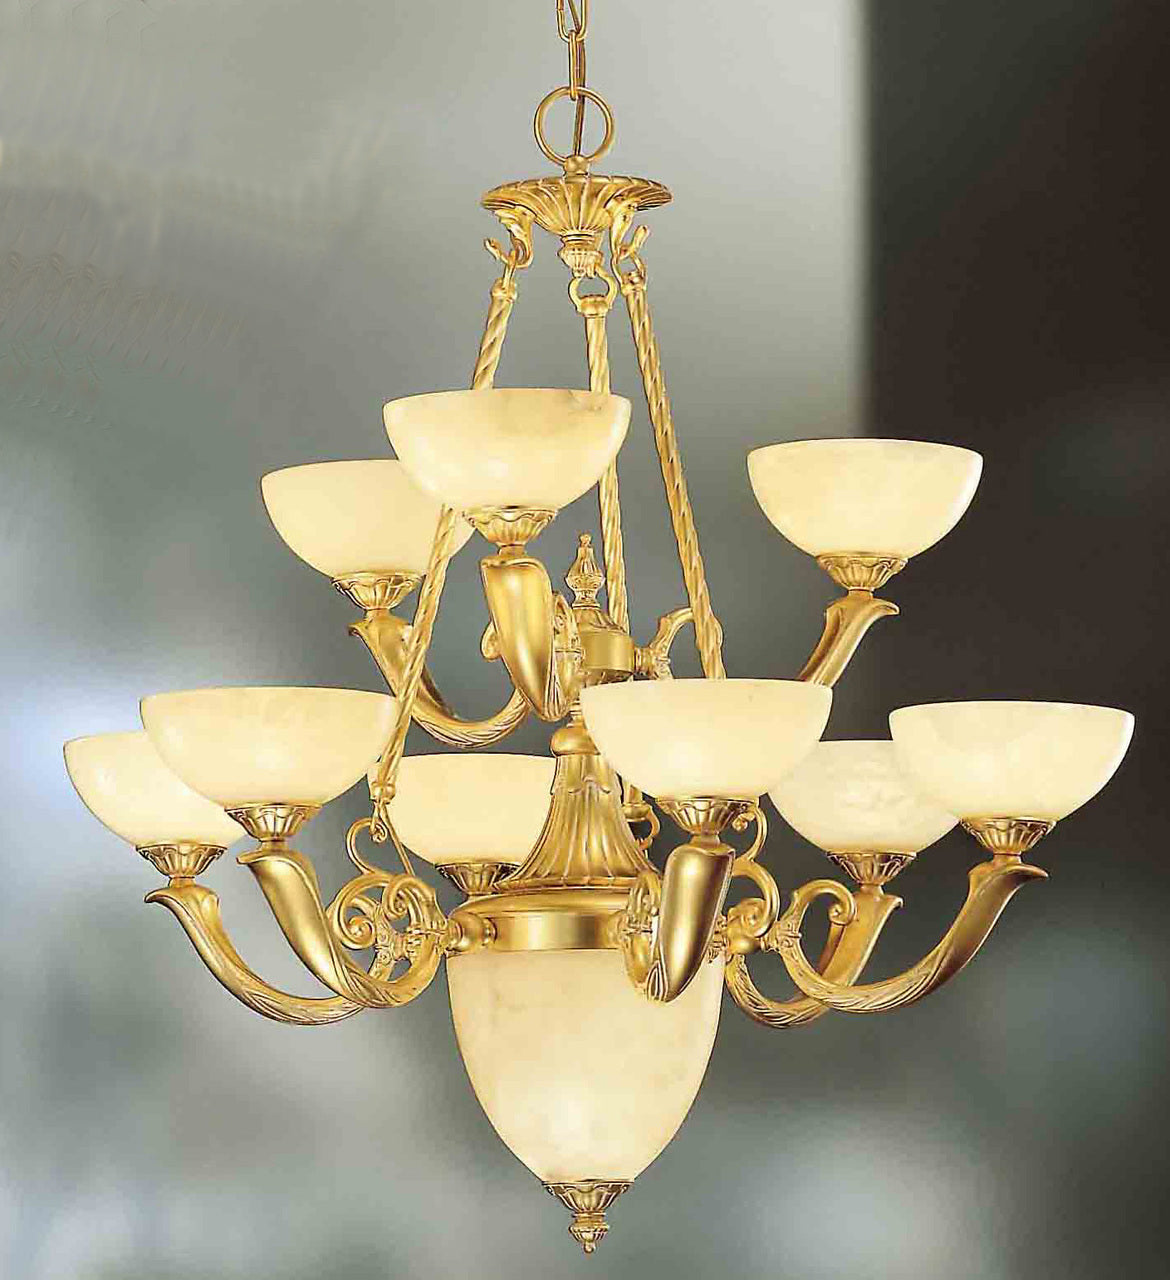 Classic Lighting 5666 GM Valencia Alabaster Chandelier in Matte Gold (Imported from Spain)